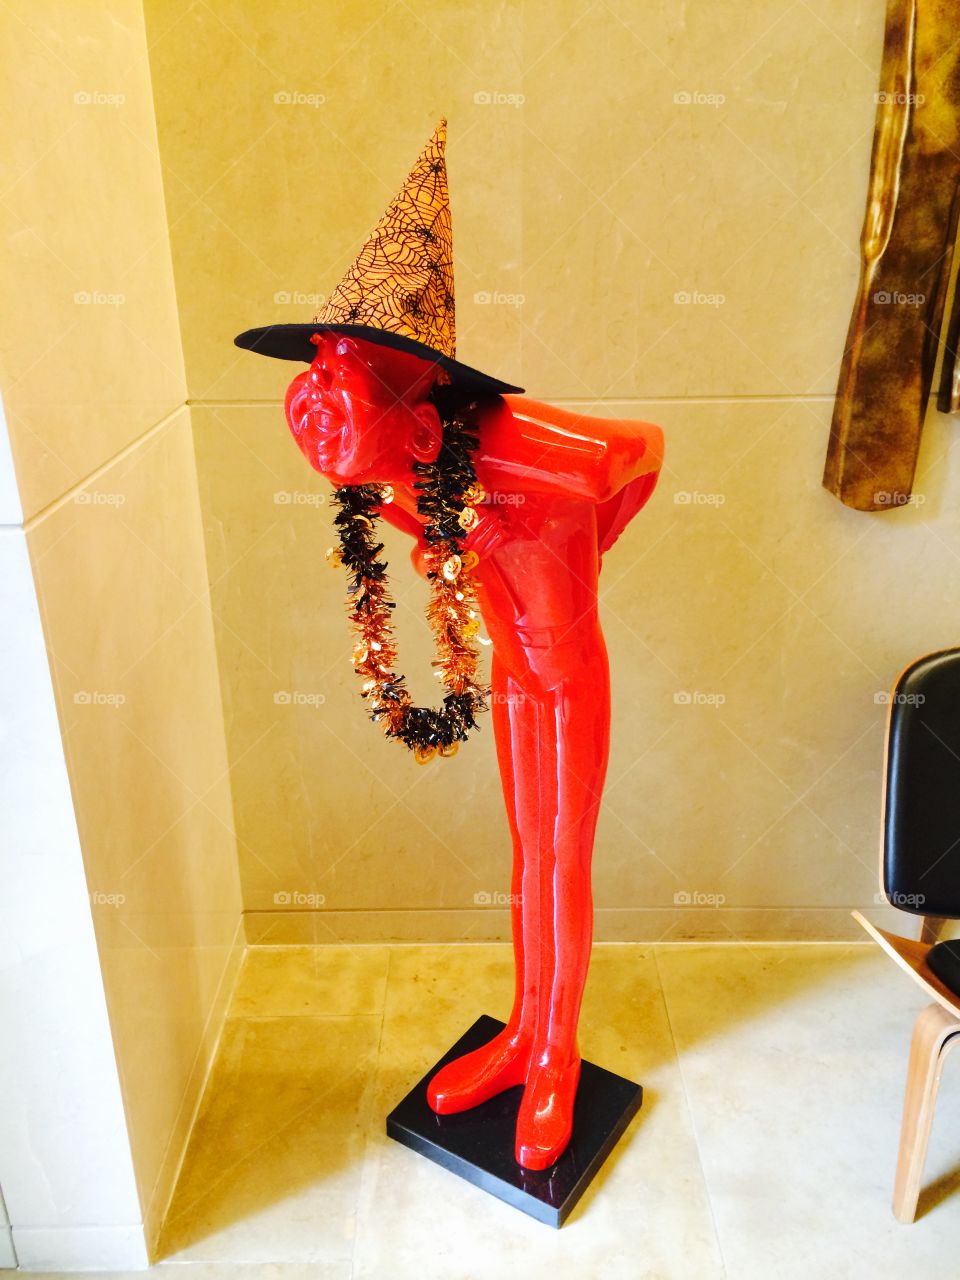 Comedy sculpture Halloween . Funny sculpture in a lobby with Halloween hat and Hawaiian necklace 